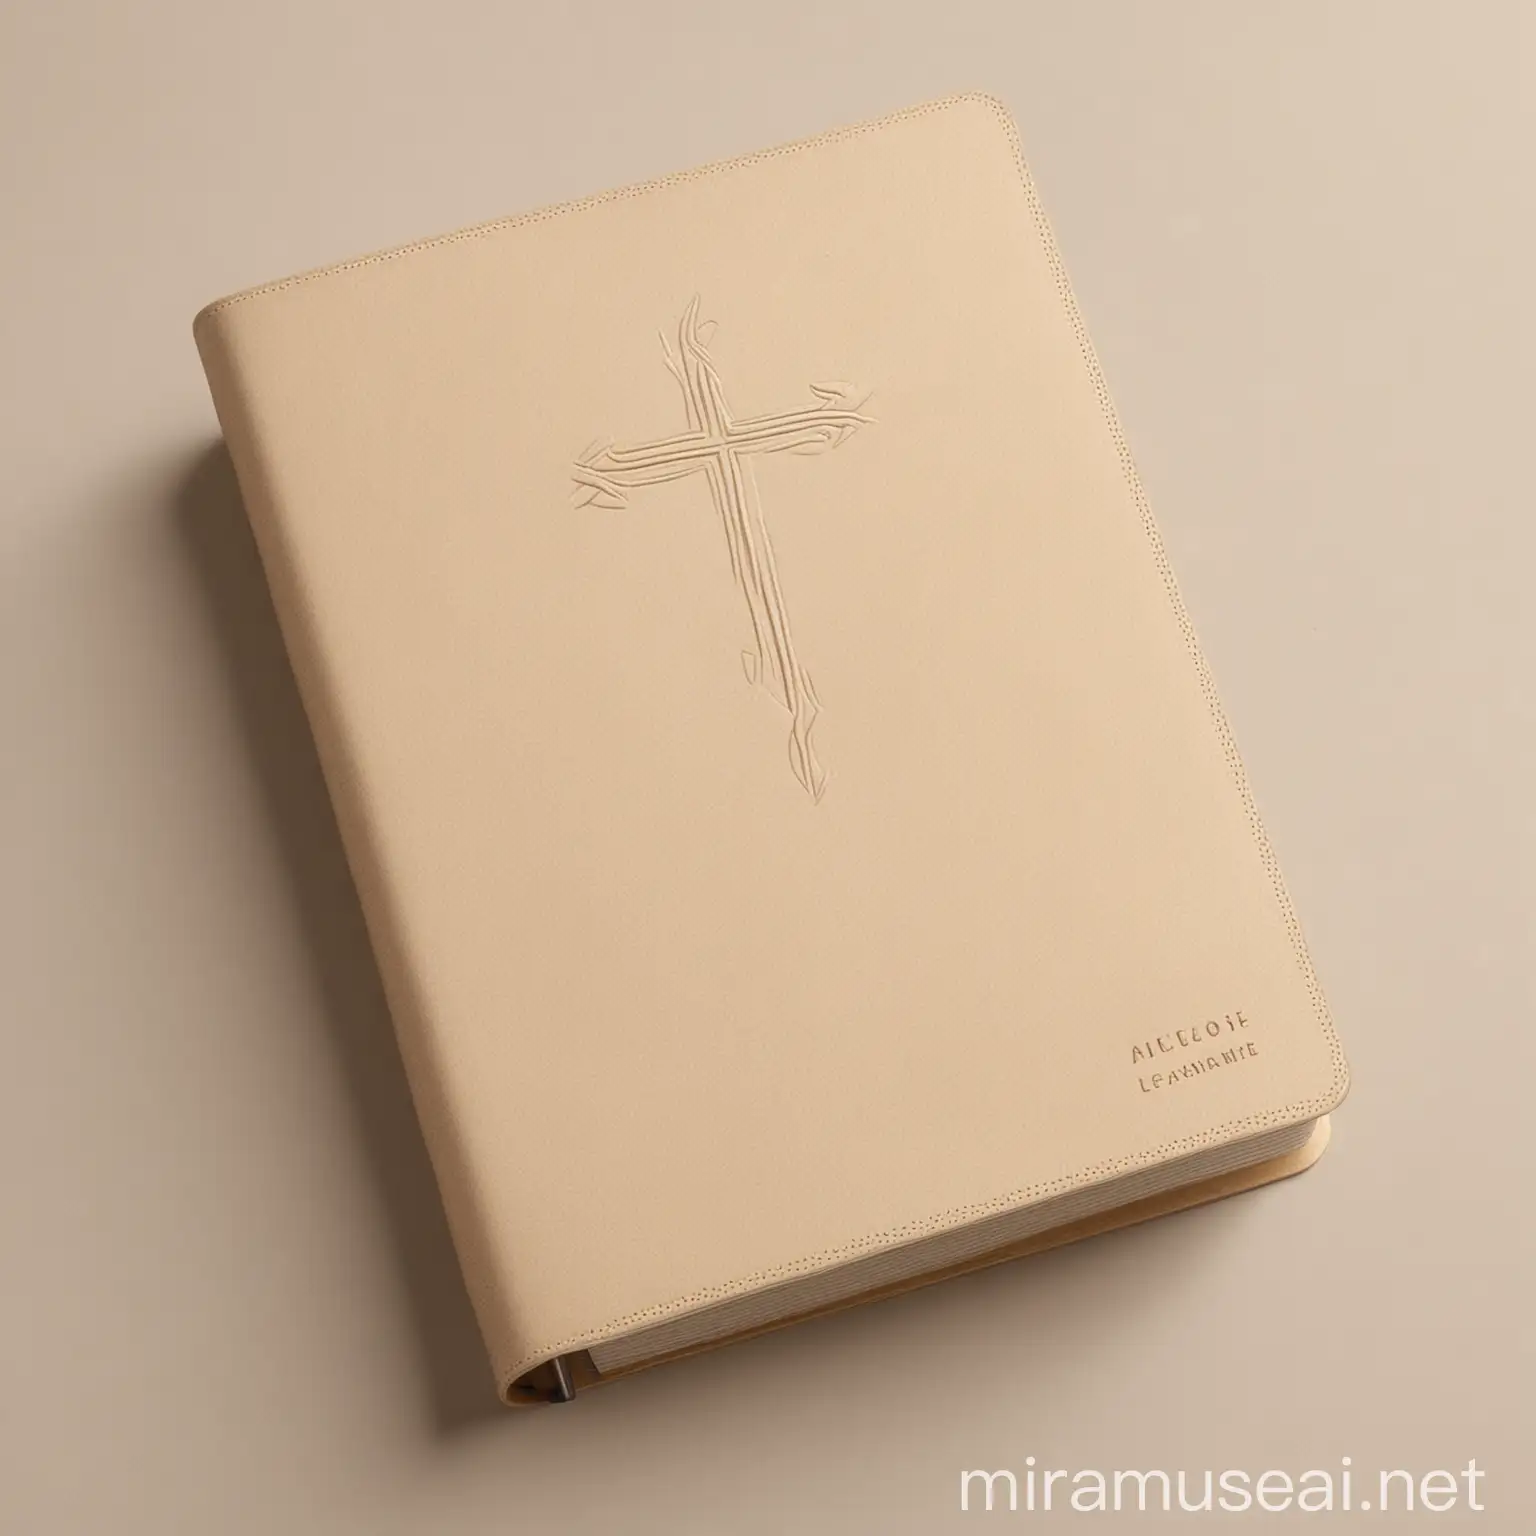 Create a minimalist design for a bible cover, in champagne color

